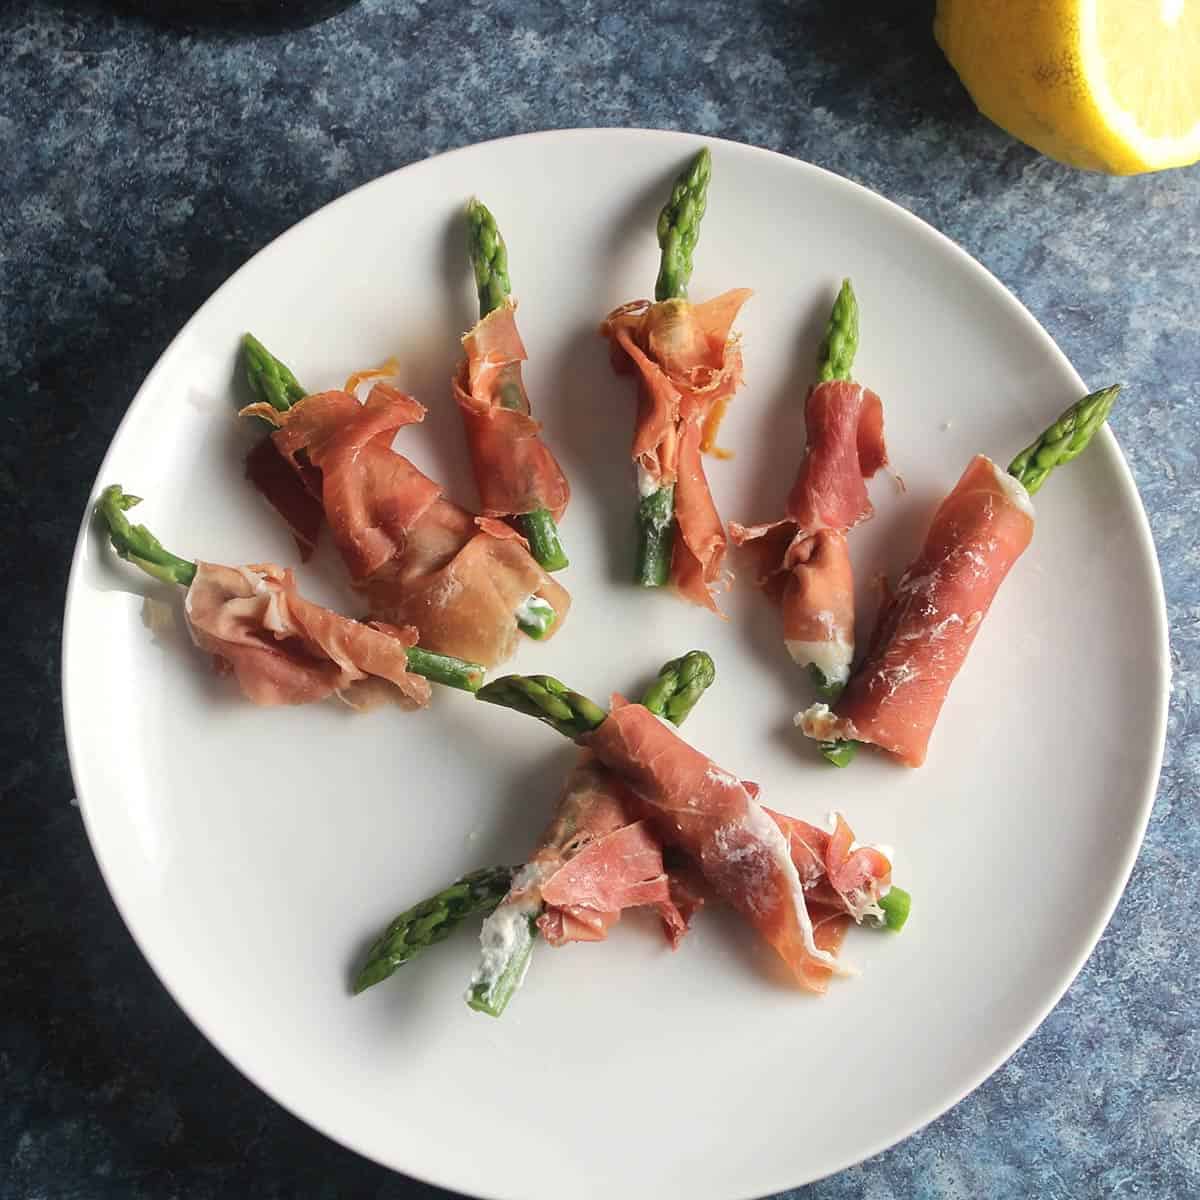 prosciutto asparagus with goat cheese on a plate.